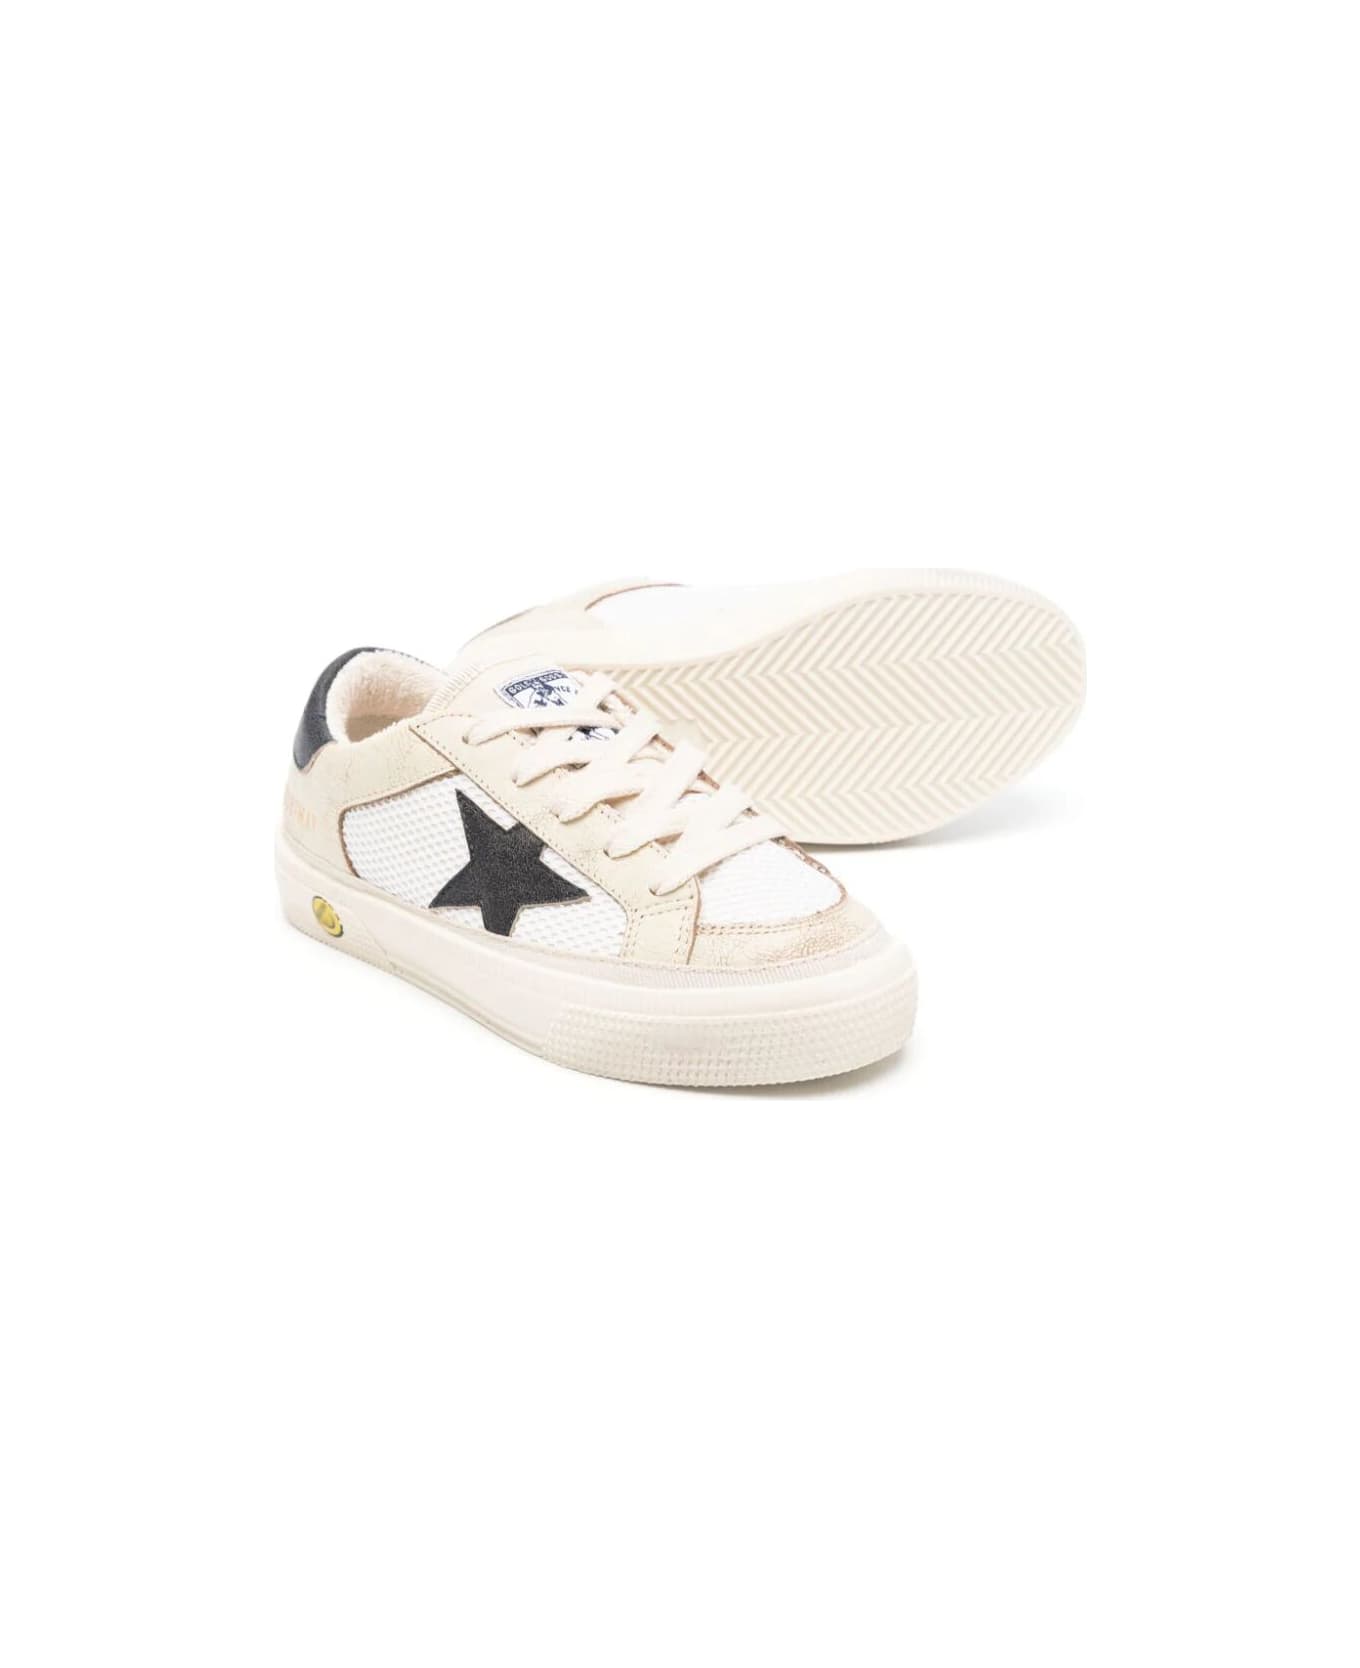 Golden Goose May Nappa Net And Leather Upper Nylon Tongue Leather Toe Star And Heel - White Blue